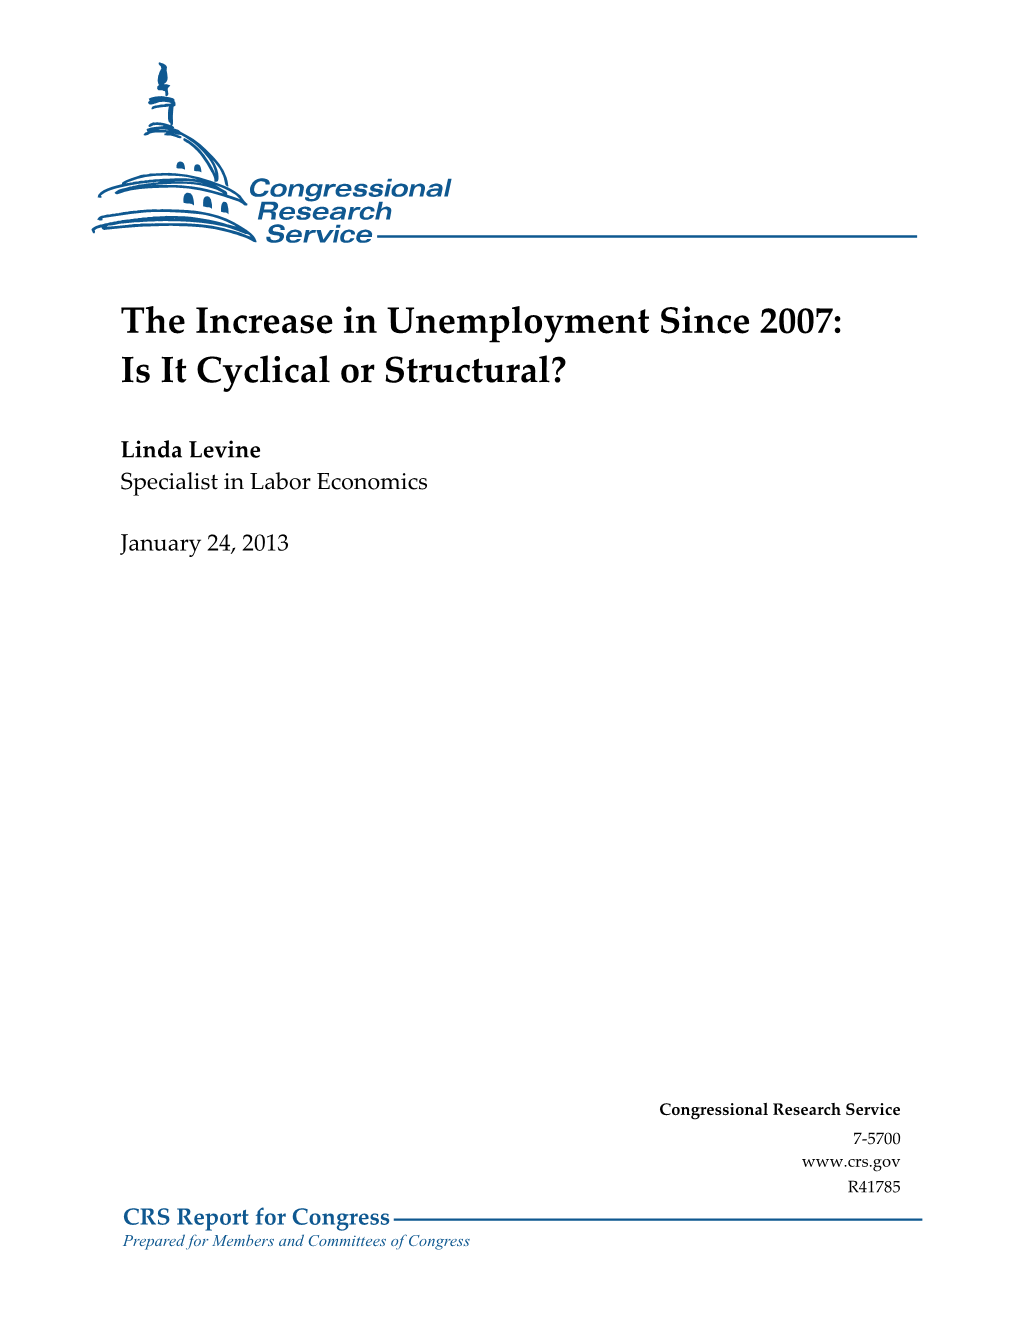 The Increase in Unemployment Since 2007: Is It Cyclical Or Structural?